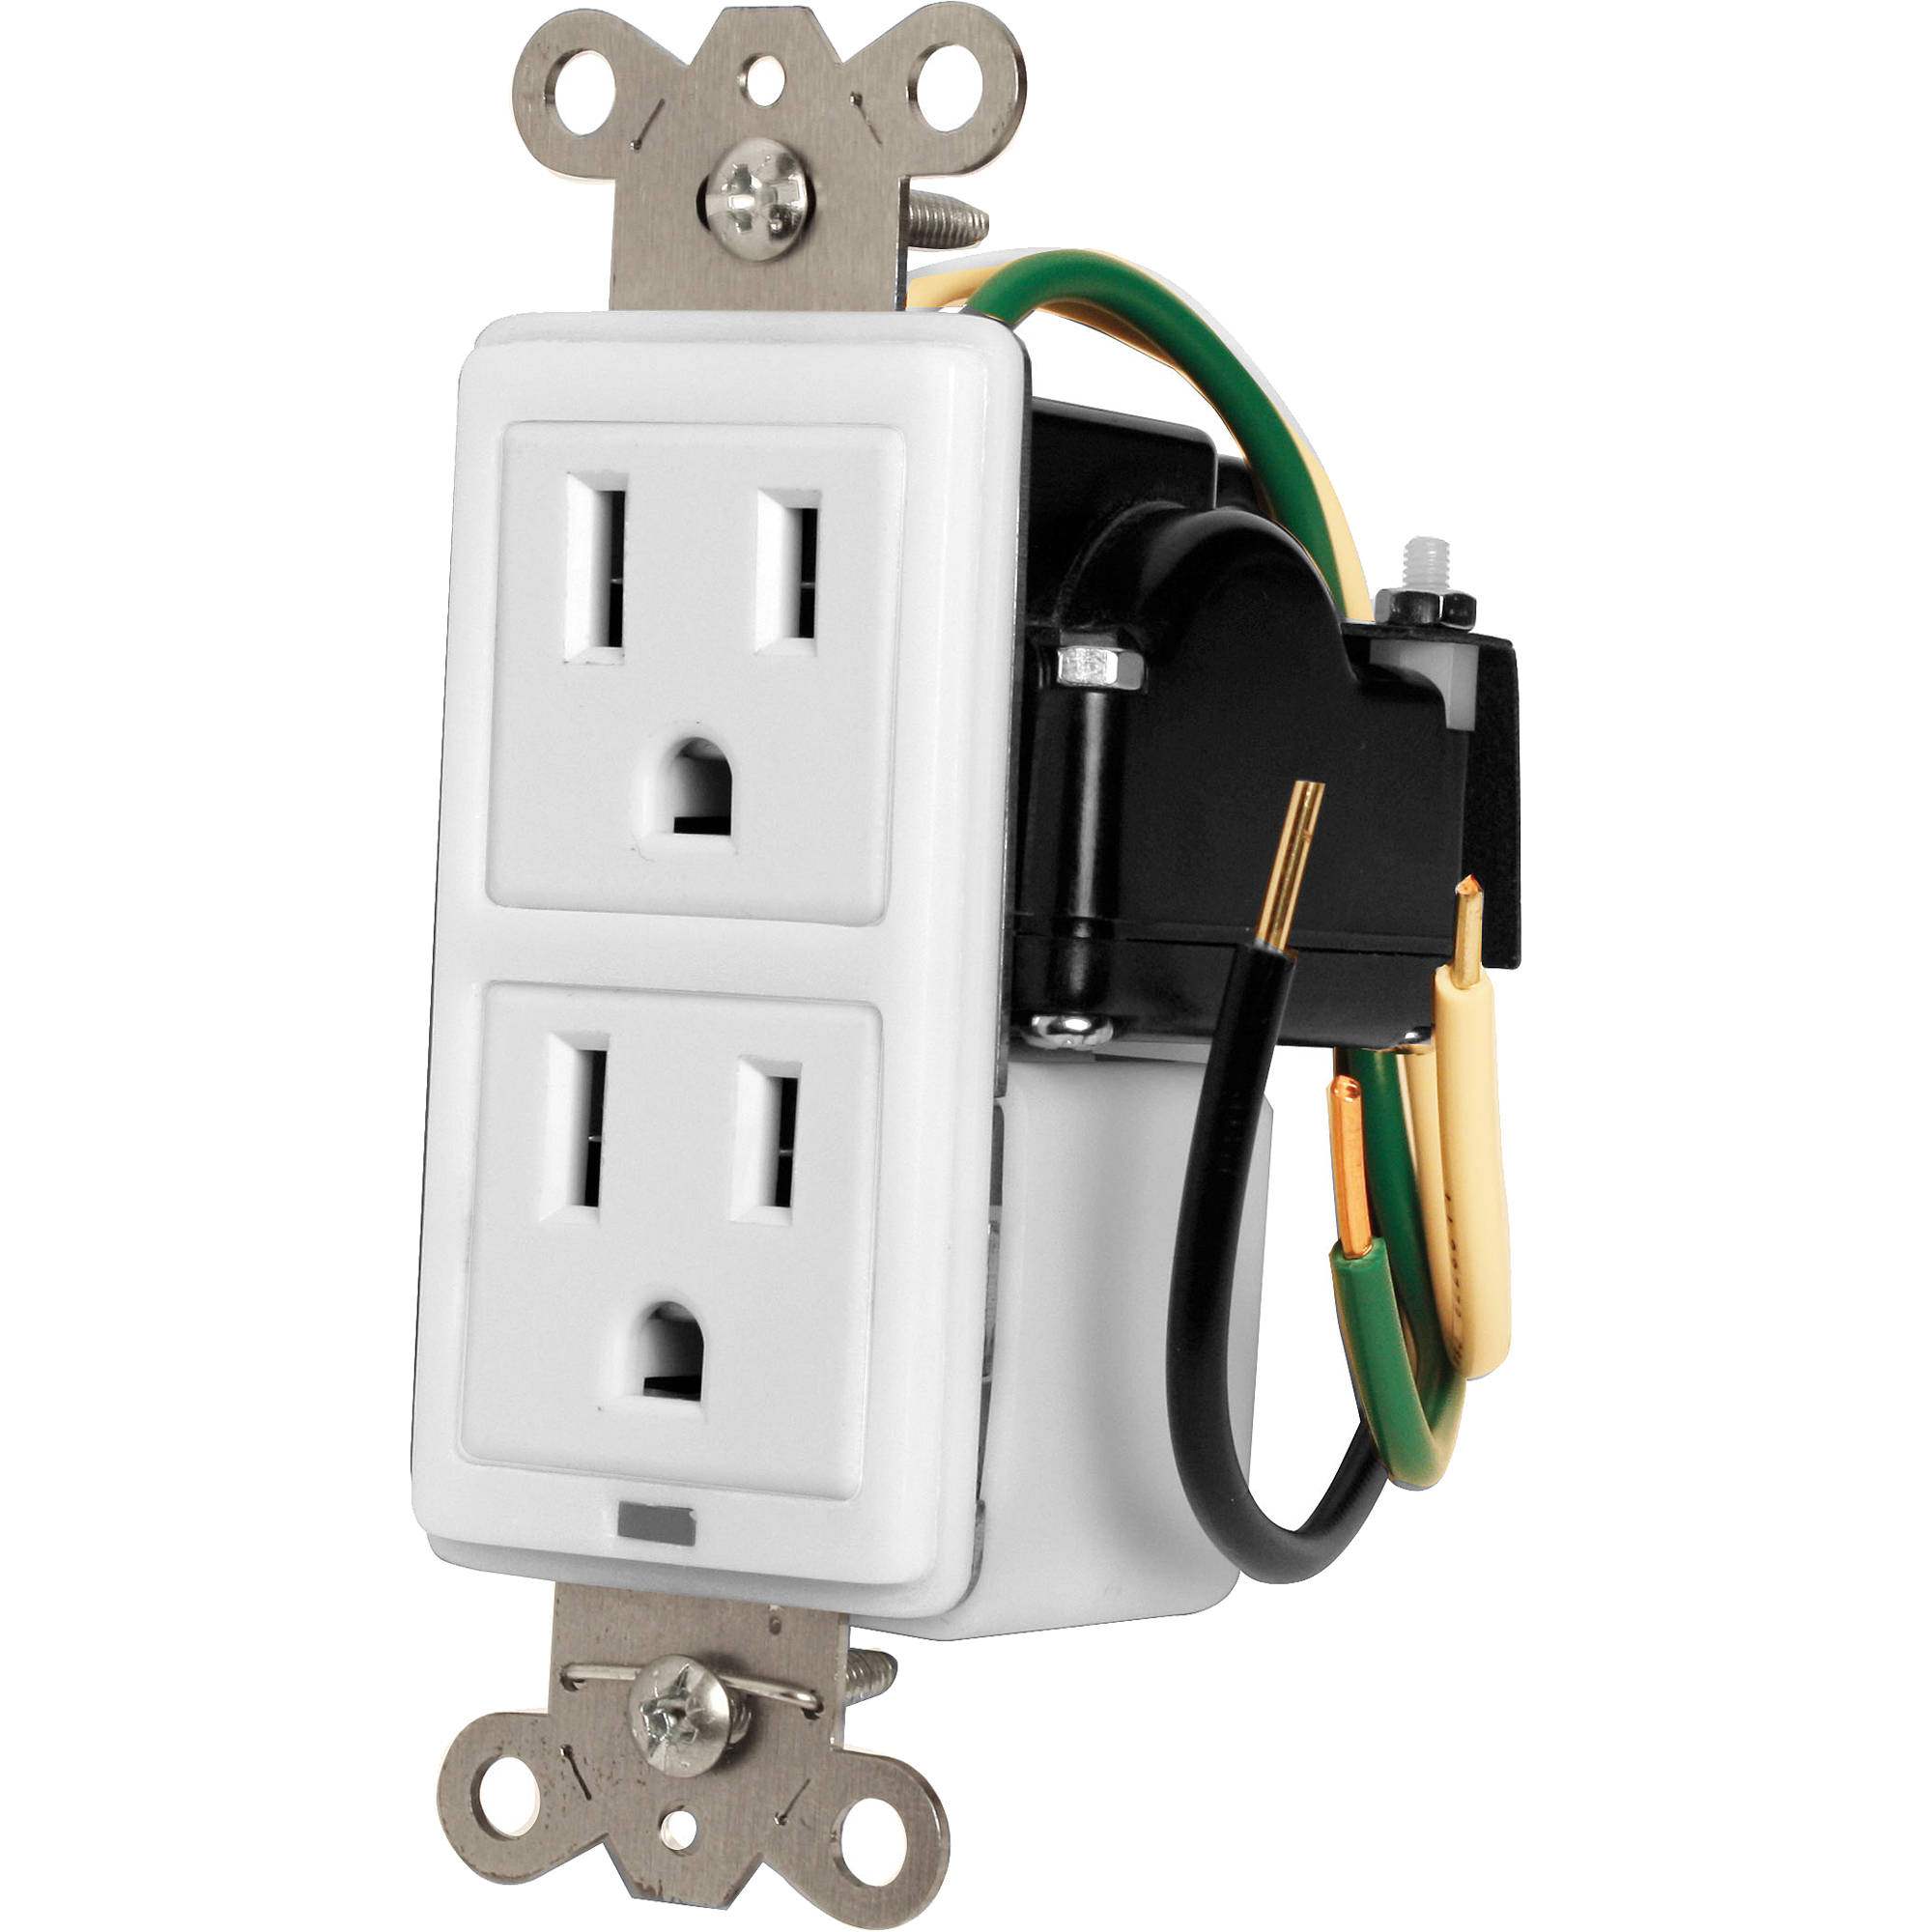 Panamax 15A In-Wall Duplex, 2 Outlets,